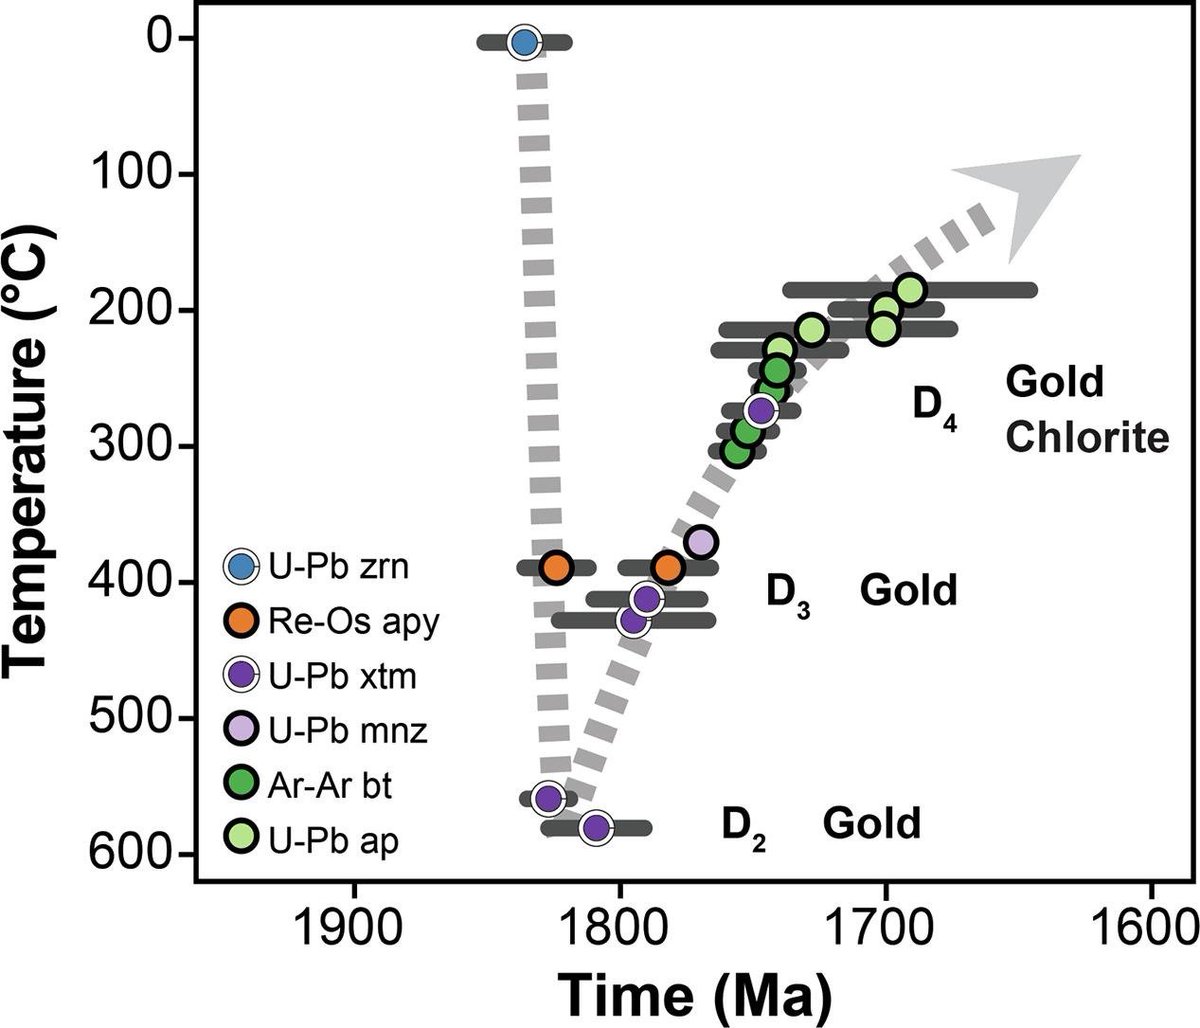 Post-orogenic exhumation triggers gold mineralization in the Trans-Hudson orogen: New geochronology results from the Lynn Lake greenstone belt, Manitoba, Canada #TGI #gold 🪨🔬💎 @GSC_CGC sciencedirect.com/science/articl…